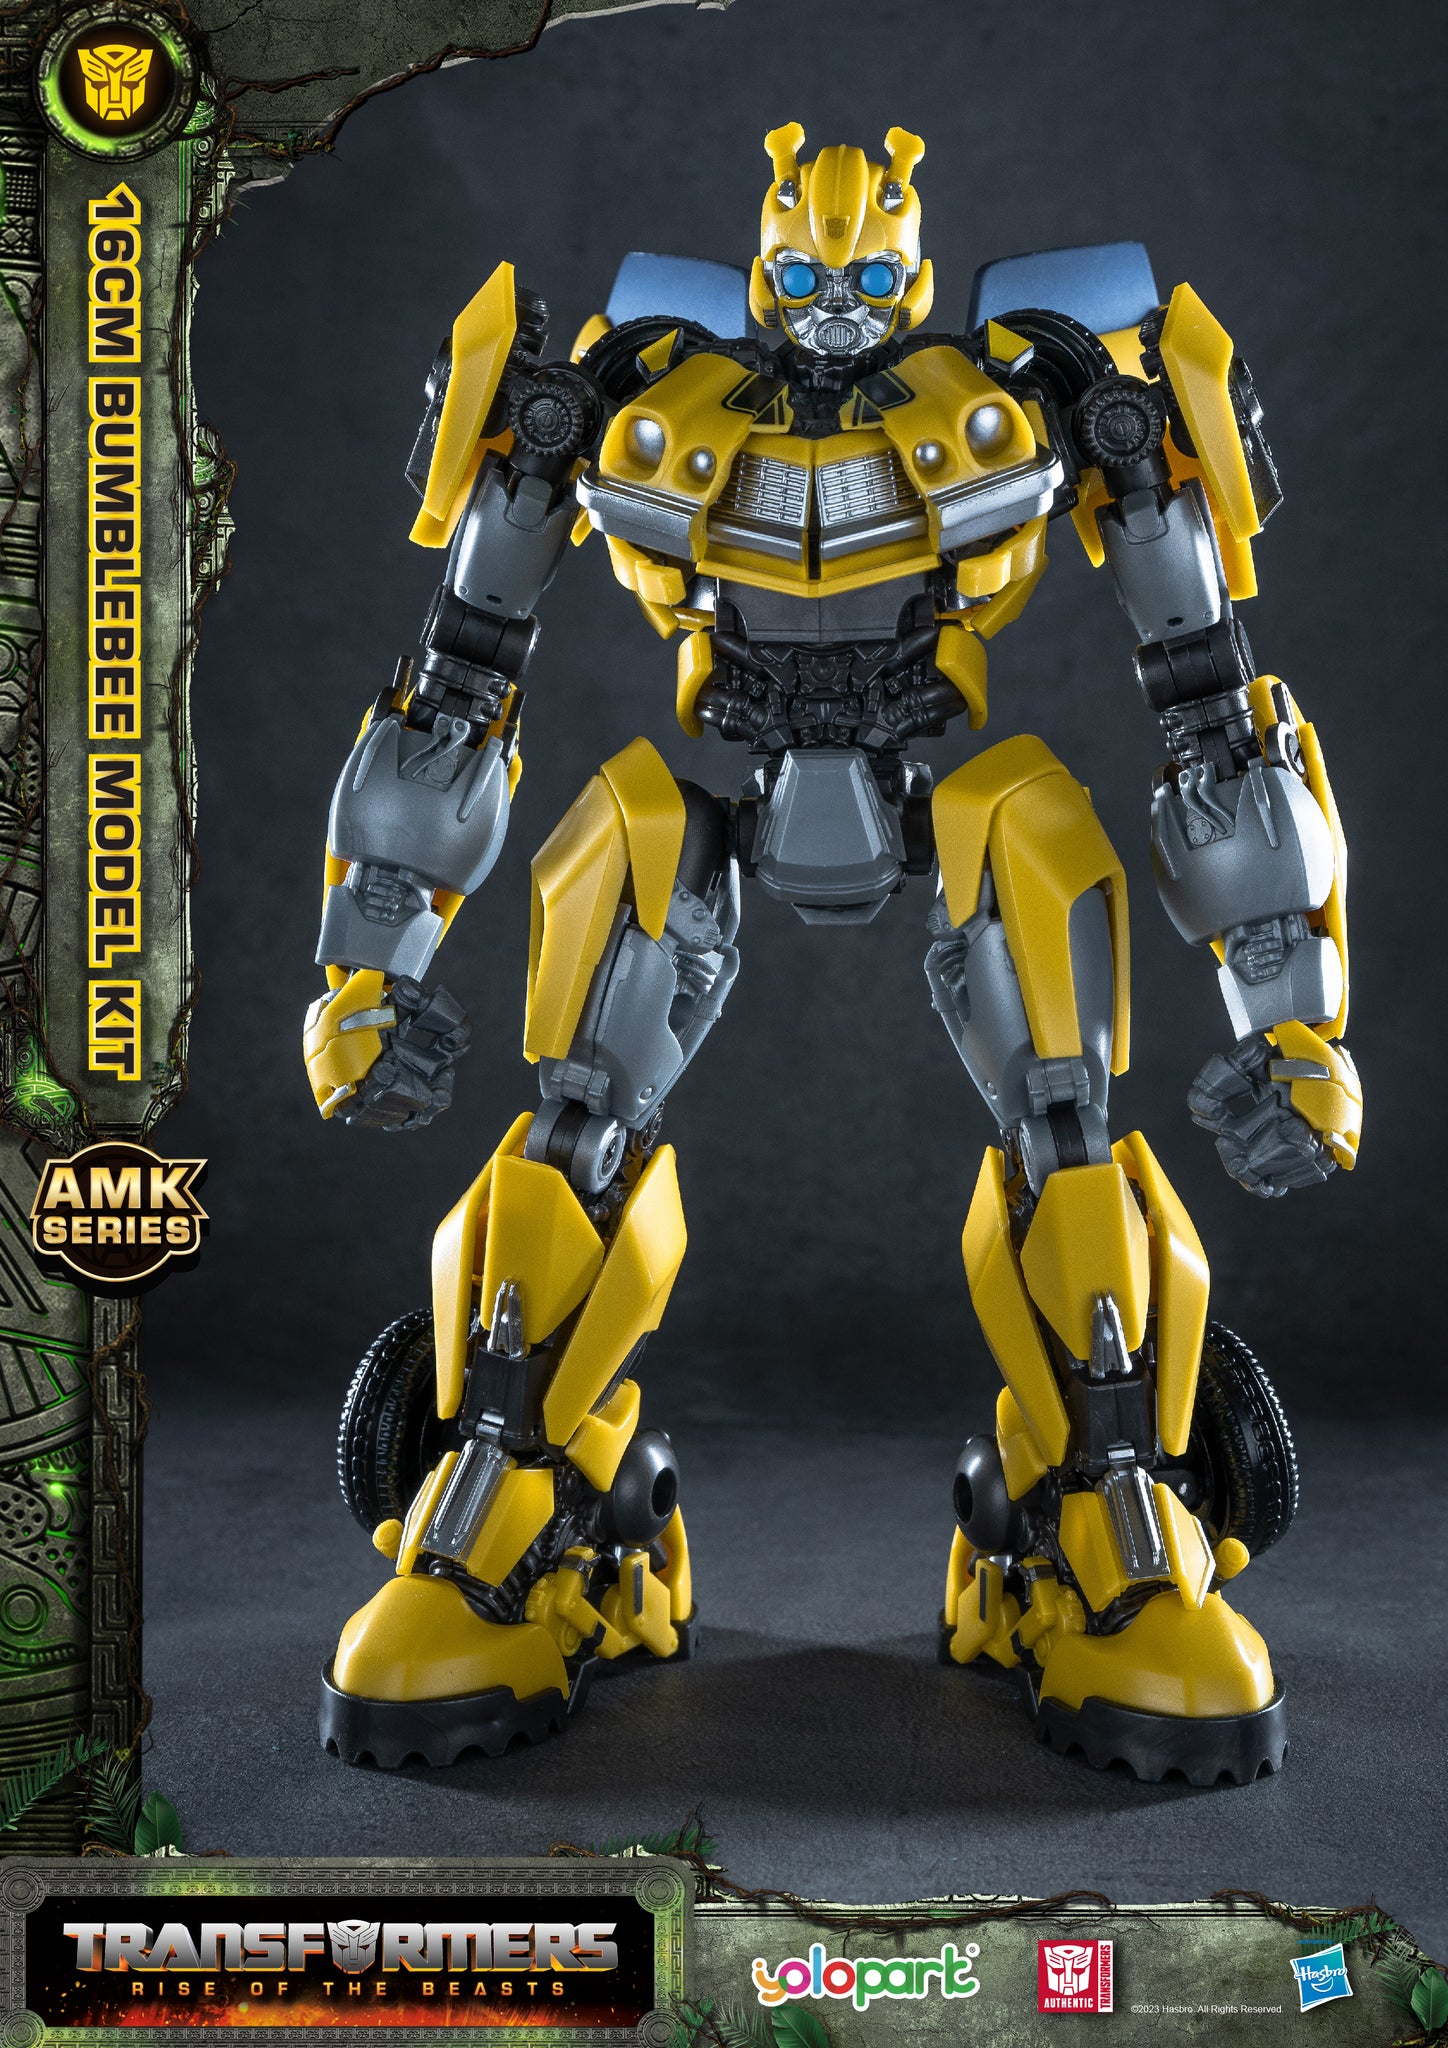 Transformers : Rise of the Beasts 16cm Bumblebee Model Kit – Yolopark